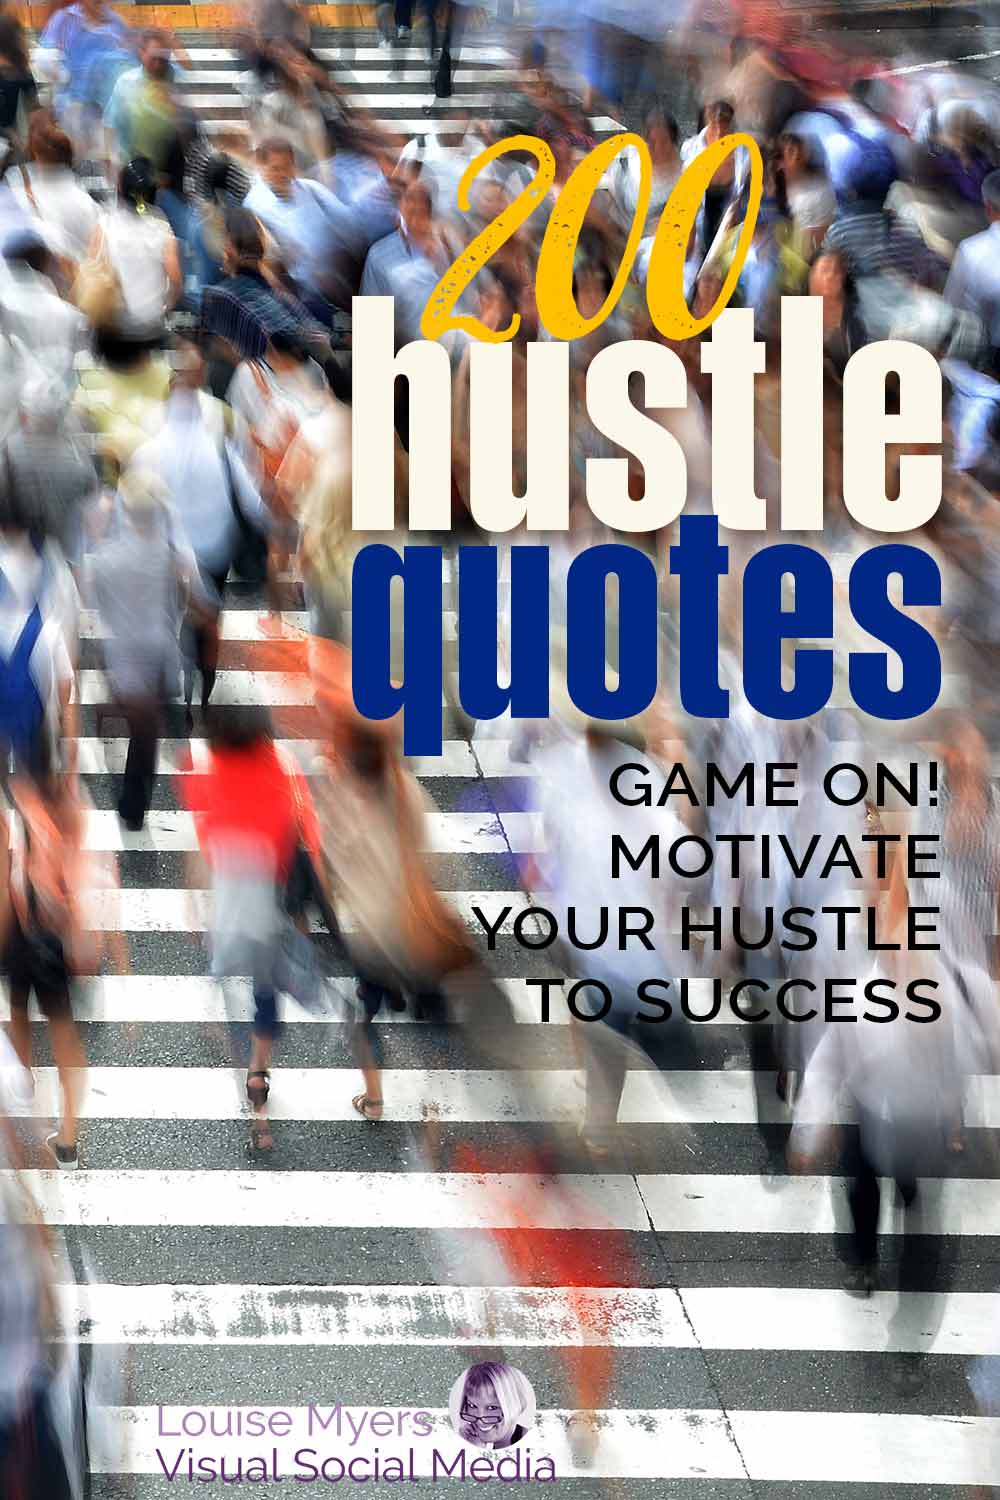 blurred motion of people rushing on a busy street has text overlay saying 200 hustle quotes, motivate your hustle to success.